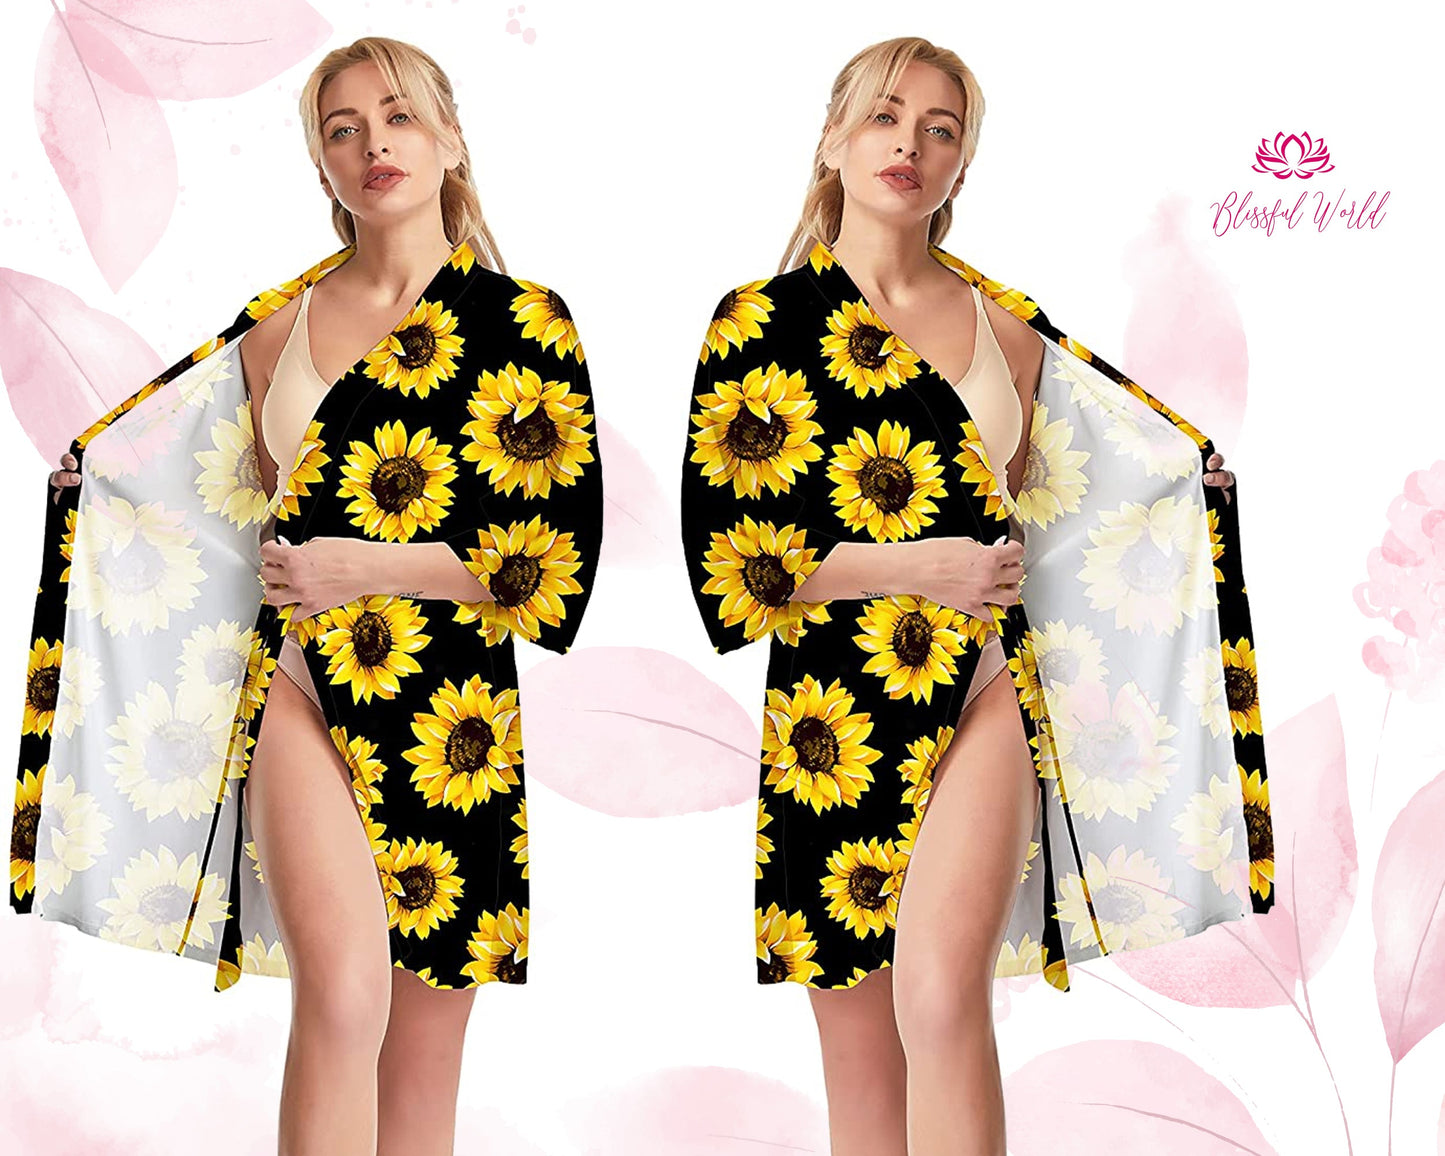 Floral Robes Satin Floral Robes Sunflower Robes Customized New Print Robes Bridesmaid Robe Personalized Robes Custom Robes Bridal Robe Kimono Robes Satin Robe